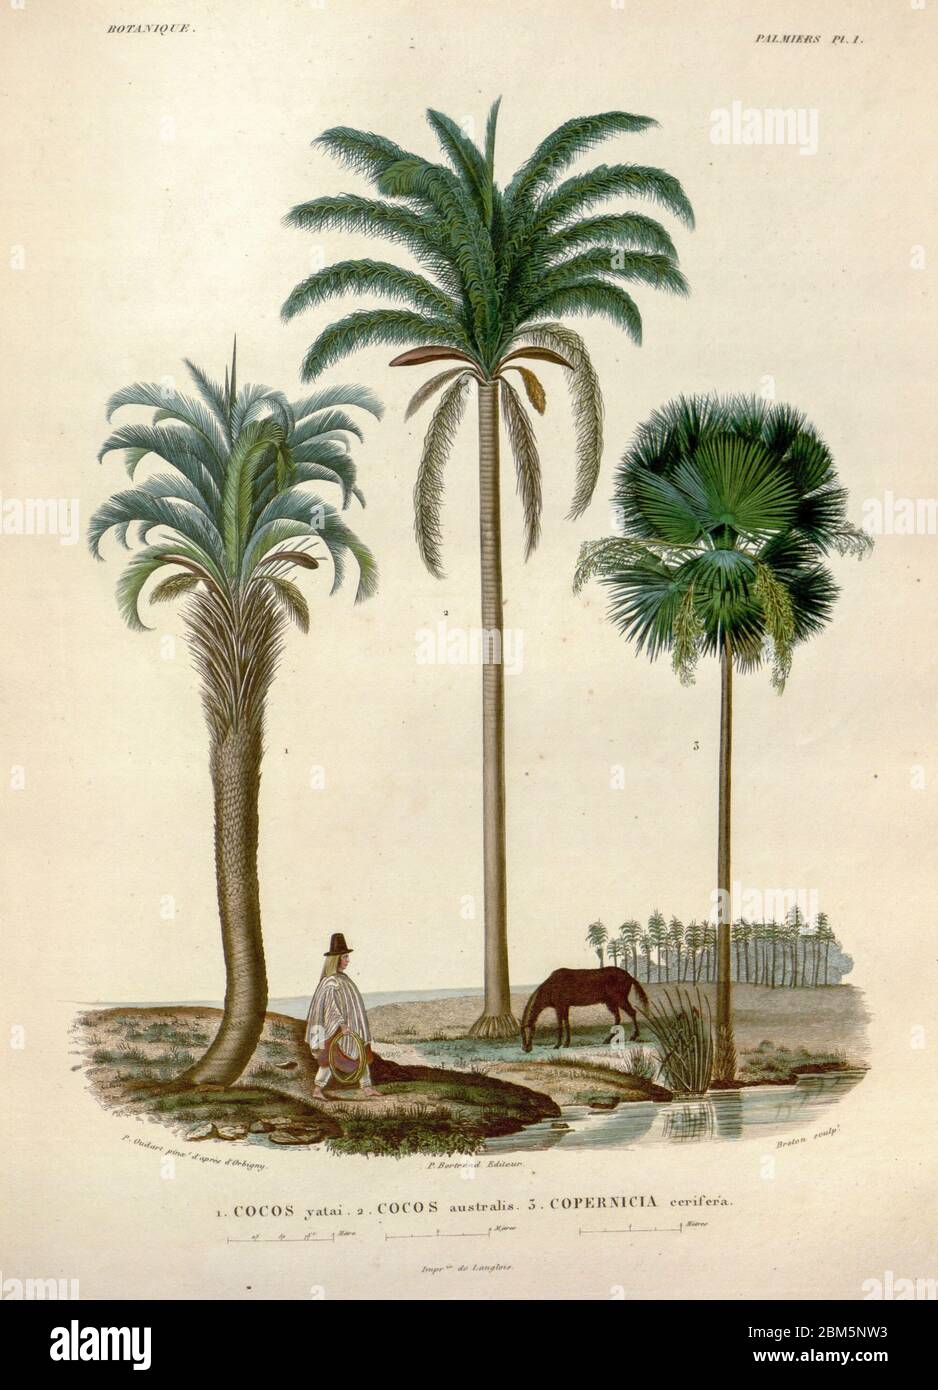 Coconut trees of South America From the book 'Voyage dans l'Amérique Méridionale' [Journey to South America: (Brazil, the eastern republic of Uruguay, the Argentine Republic, Patagonia, the republic of Chile, the republic of Bolivia, the republic of Peru), executed during the years 1826 - 1833] By: Orbigny, Alcide Dessalines d', 1802-1857; Montagne, Jean François Camille, 1784-1866; Martius, Karl Friedrich Philipp von, 1794-1868 Published Paris :Chez Pitois-Levrault et c.e ... ;1835-1847 Stock Photo